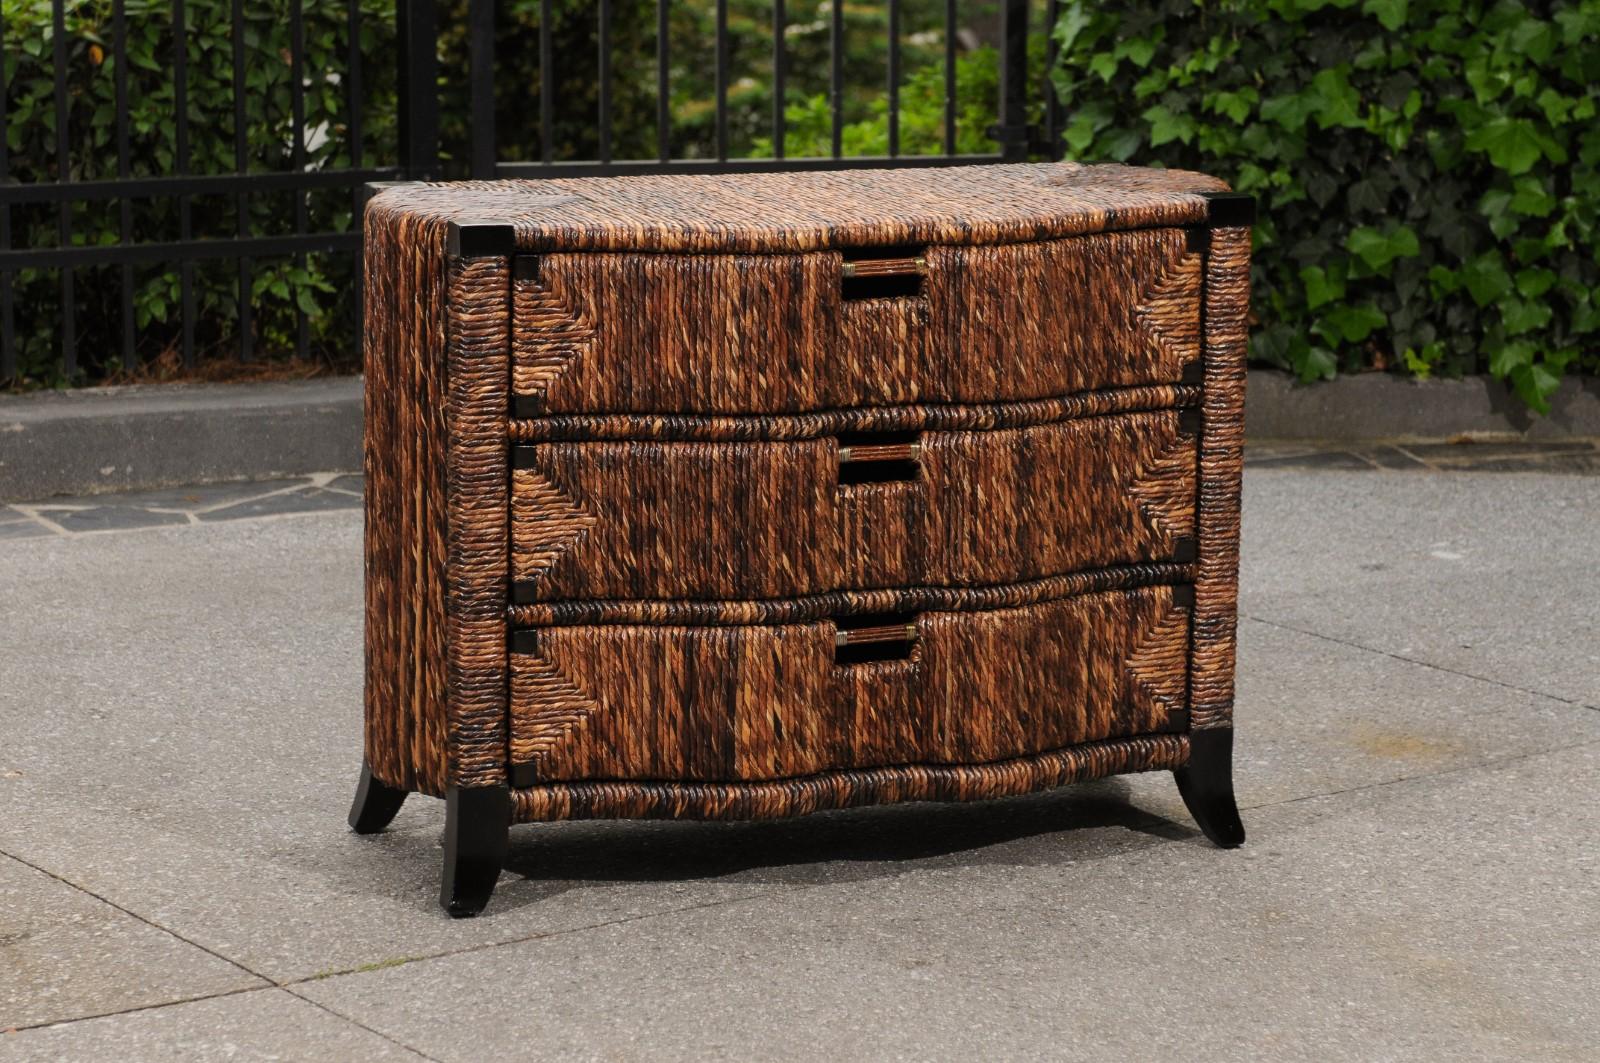 This magnificent commode is shipped as professionally photographed and described in the listing narrative: Meticulously professionally restored and completely installation ready.

A majestic organic commode from a limited production collection